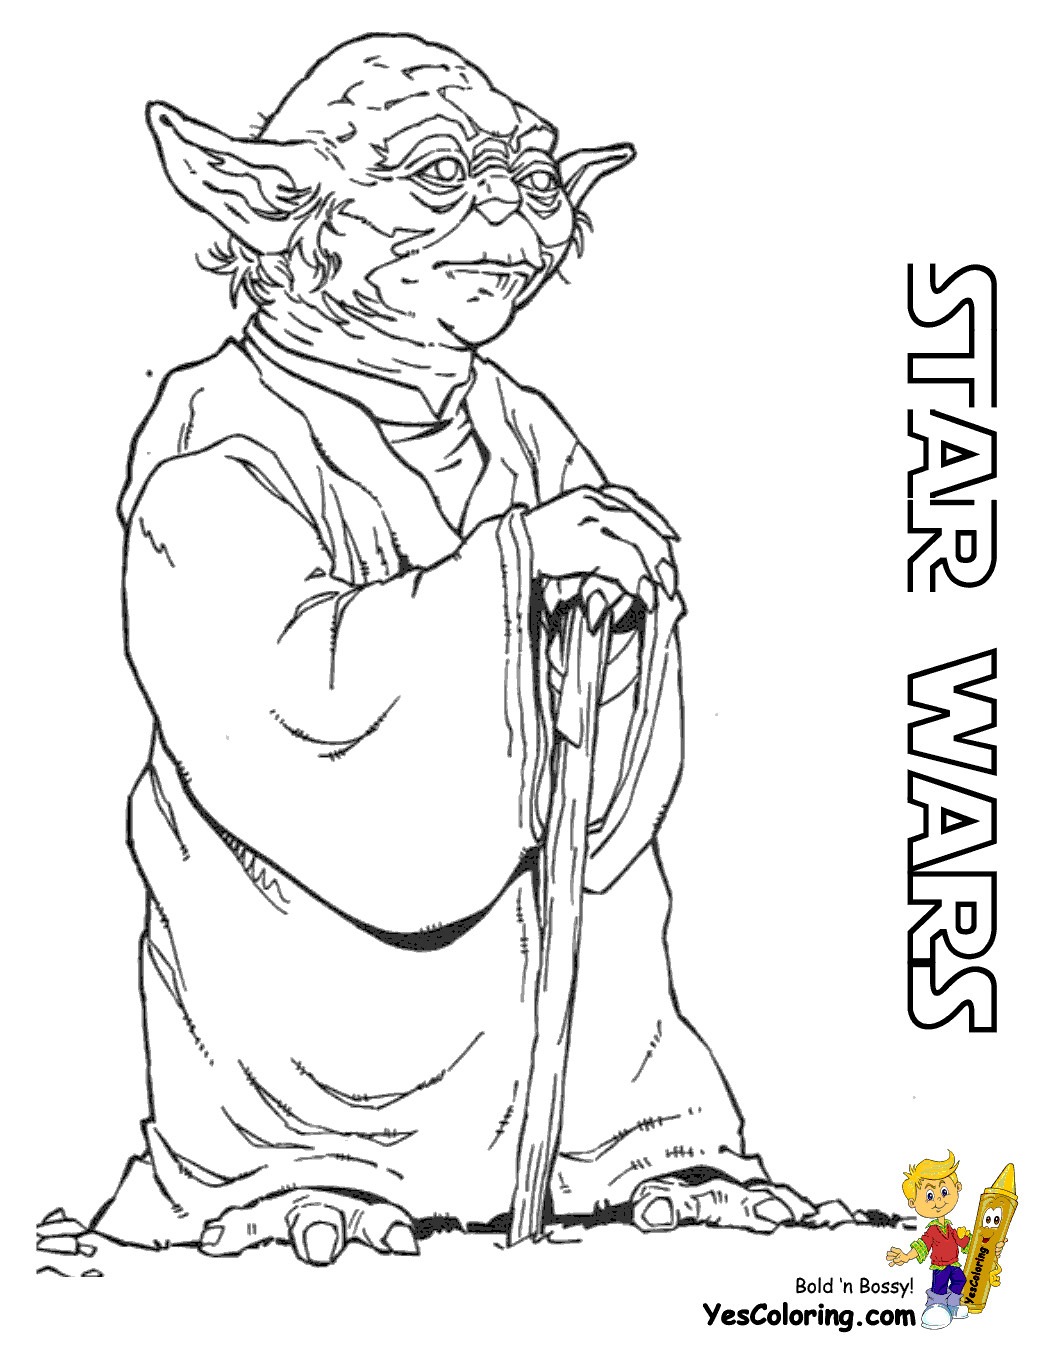 Star Wars Coloring Book For Kids
 Famous Star Wars Coloring Star Wars